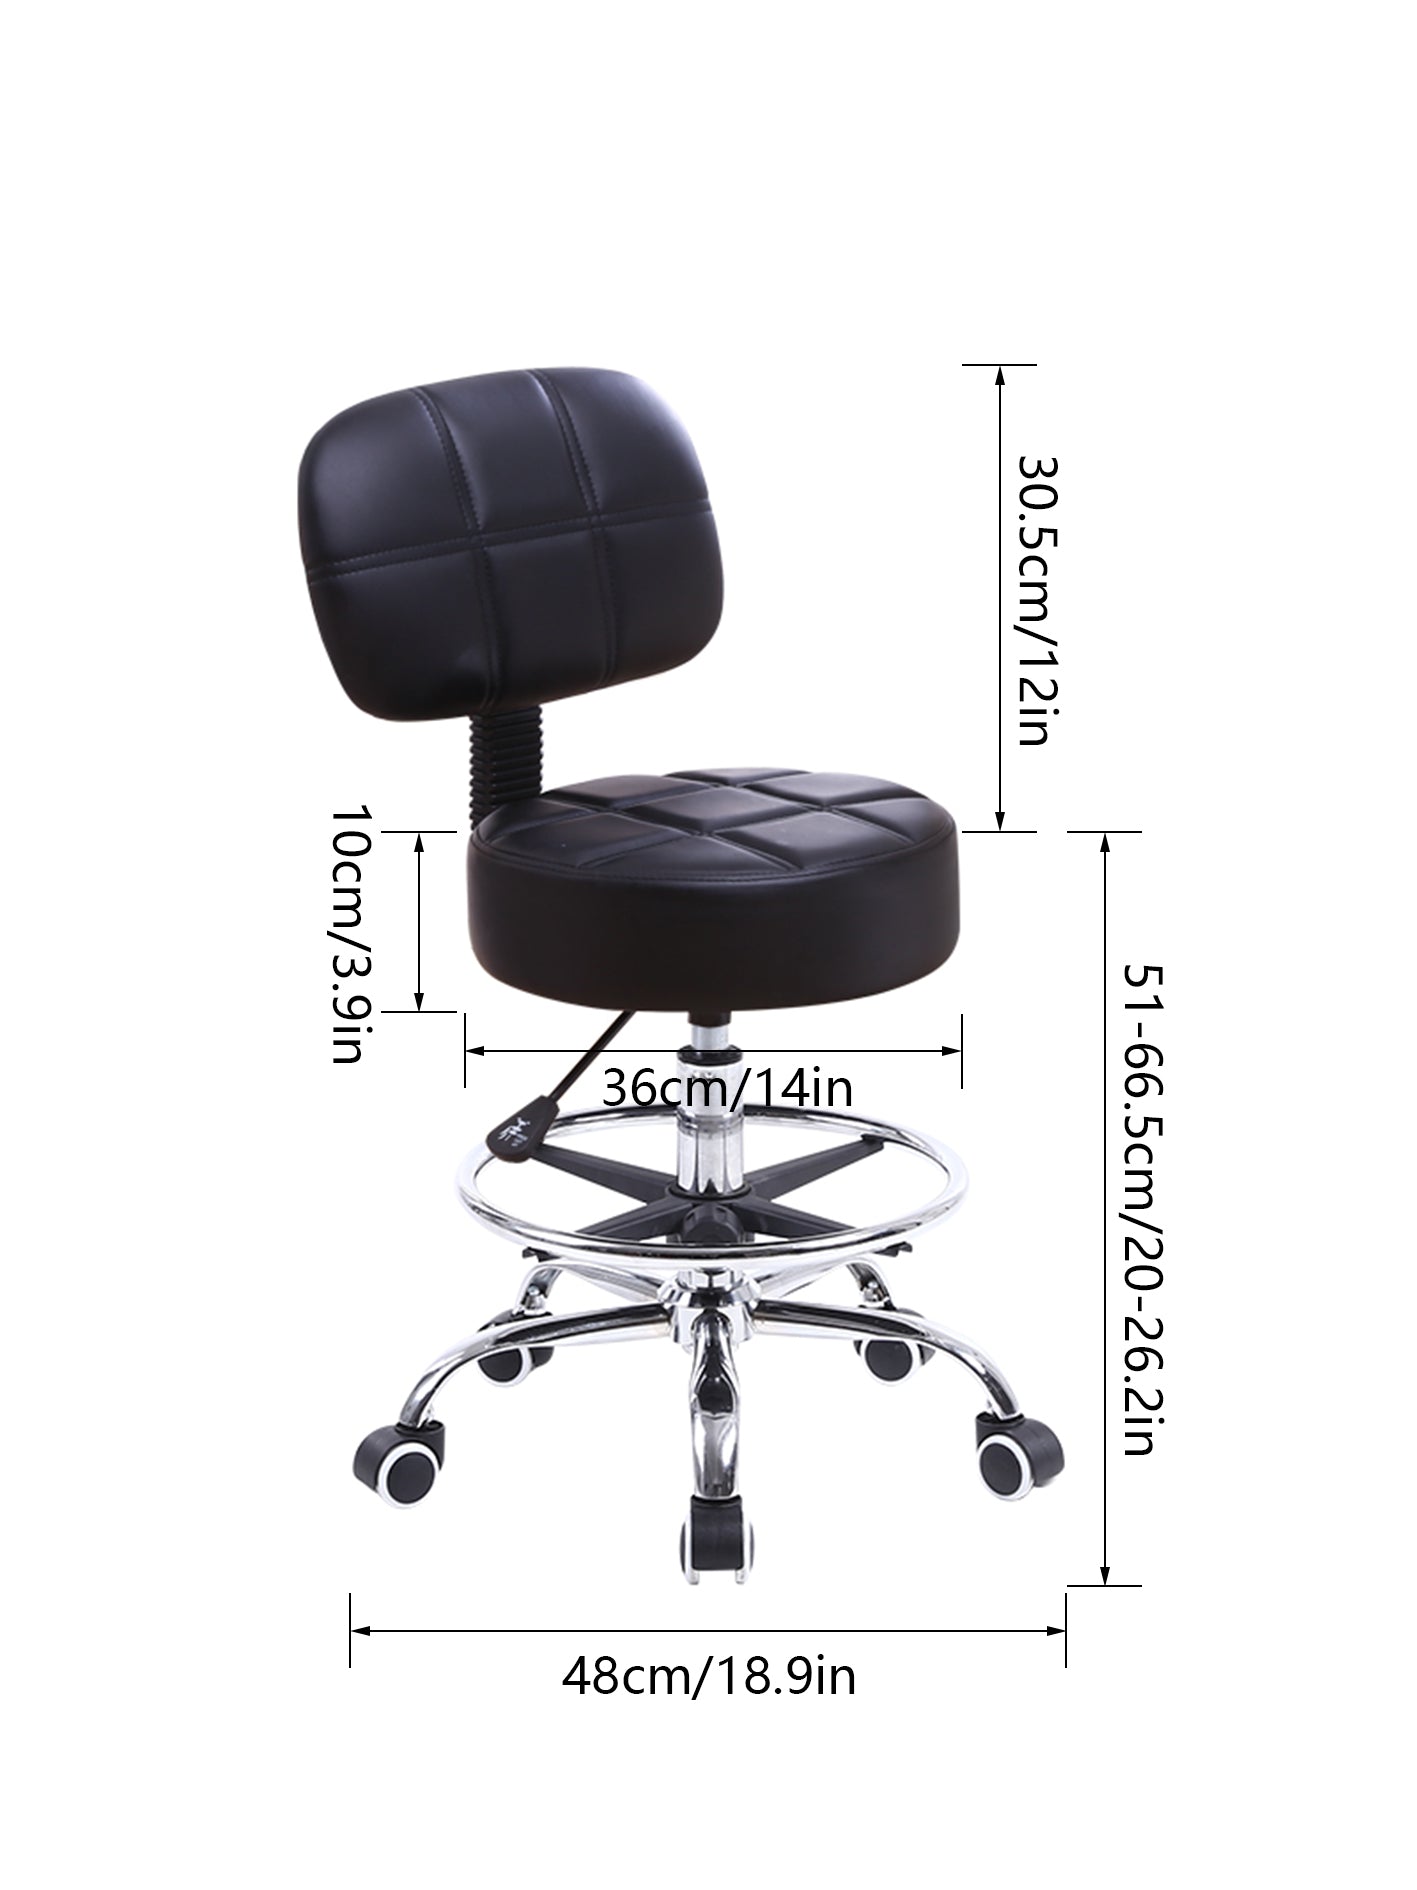 KKTONER Swivel Round Rolling Chair PU Leather with Adjustable Footrest Height Adjustable Task Work Drafting Chair with Back Black